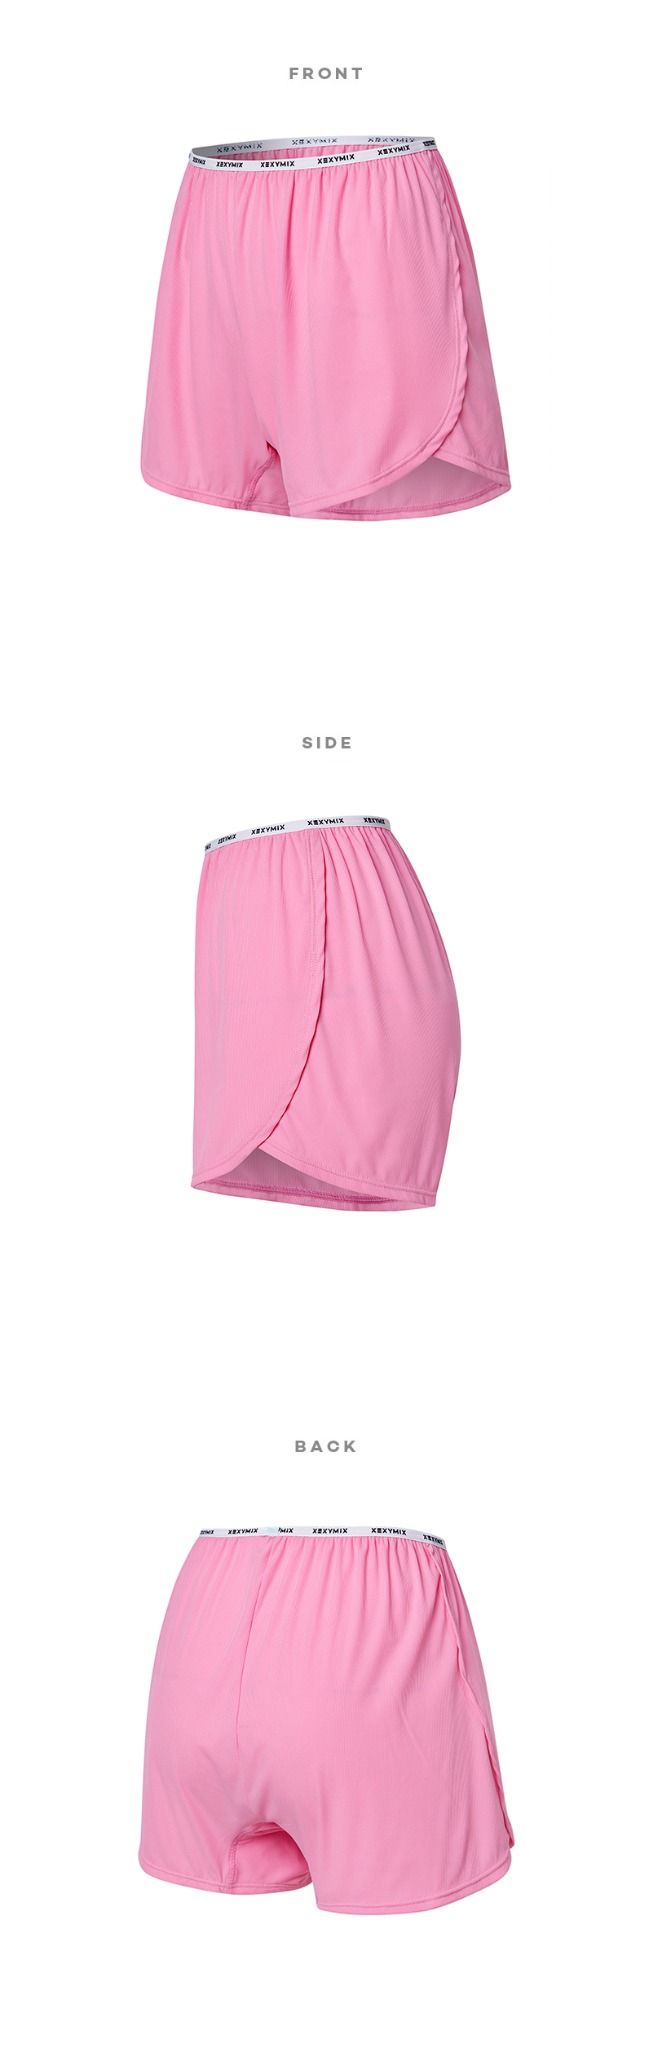  LB6005F_Flare Woman Trunks_Pink Muhly 